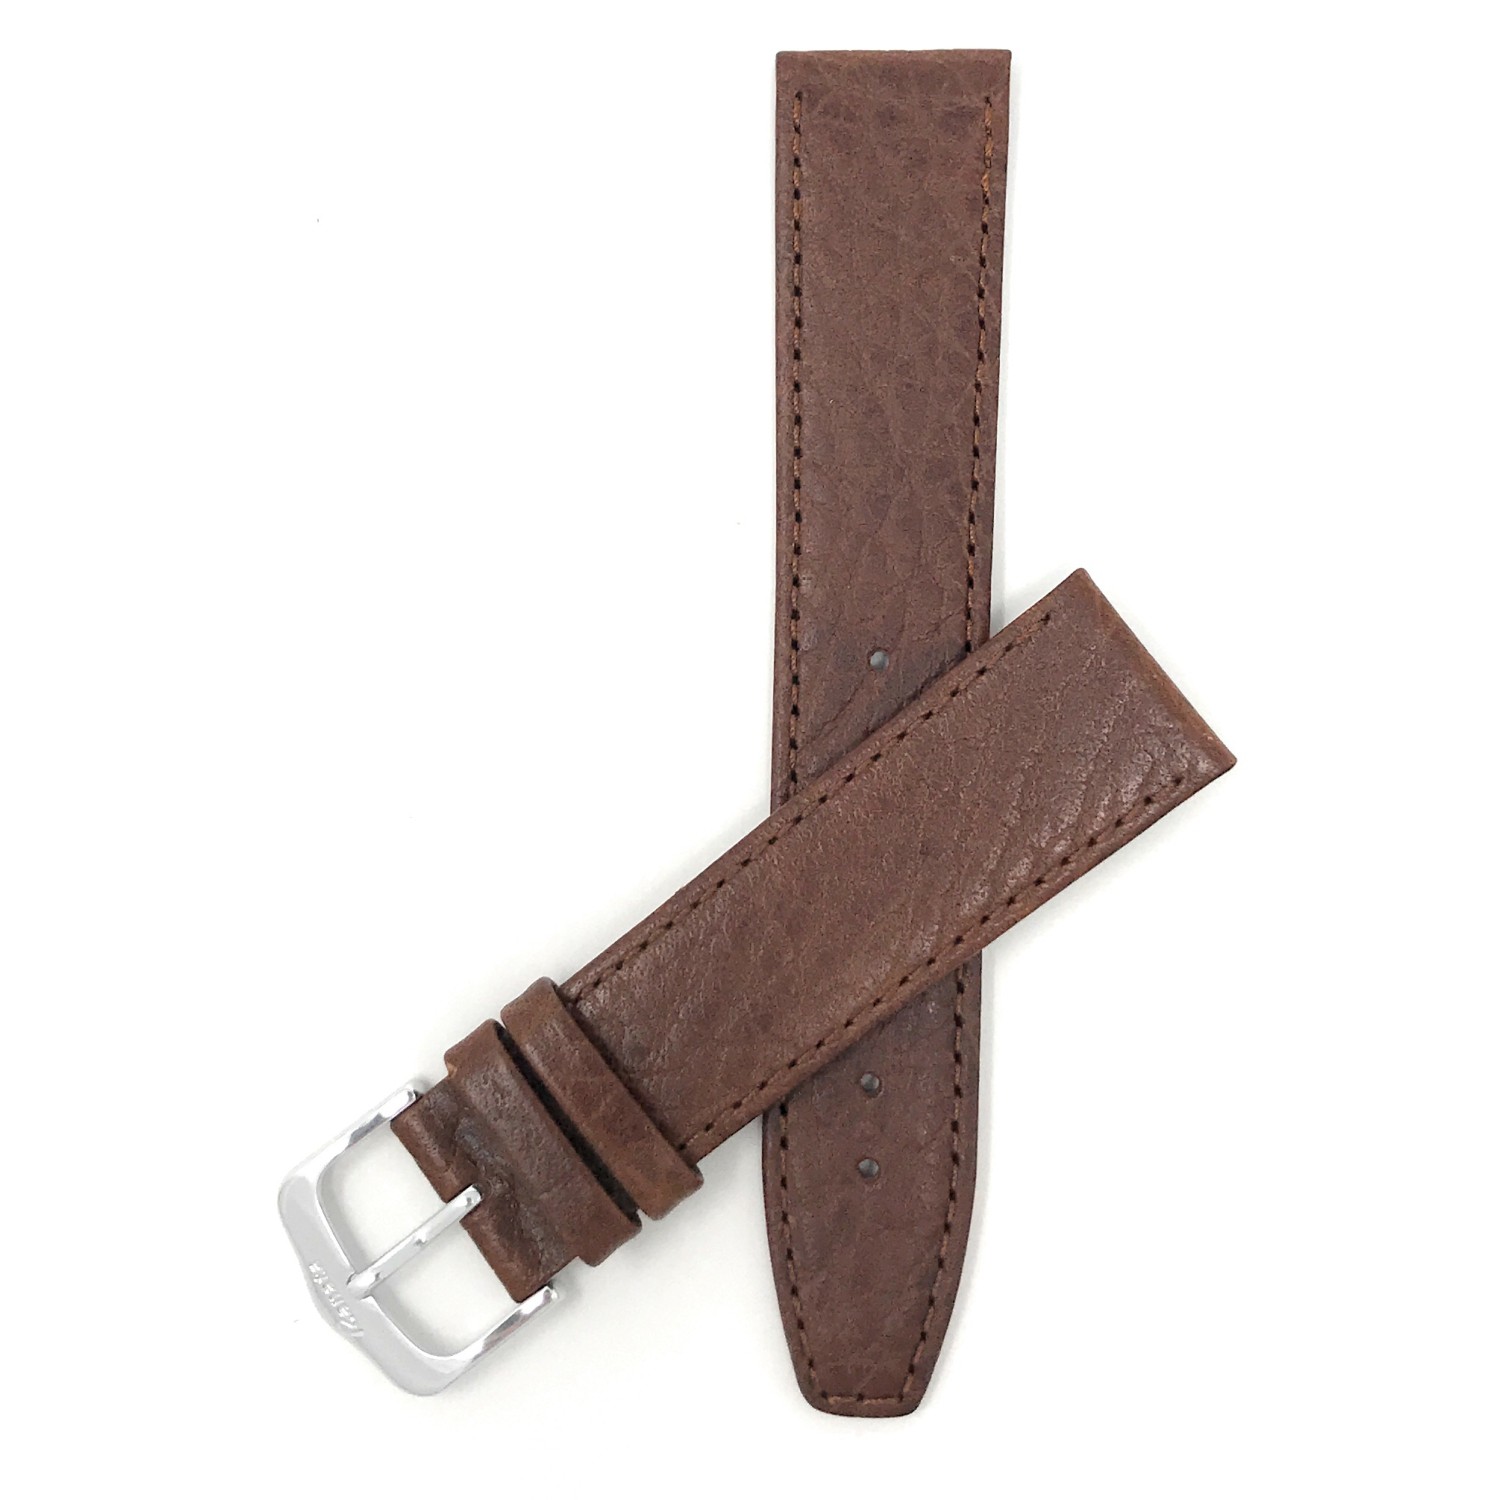 18mm, Slim, Brown Mat Finish, Genuine Leather Watch Band Strap